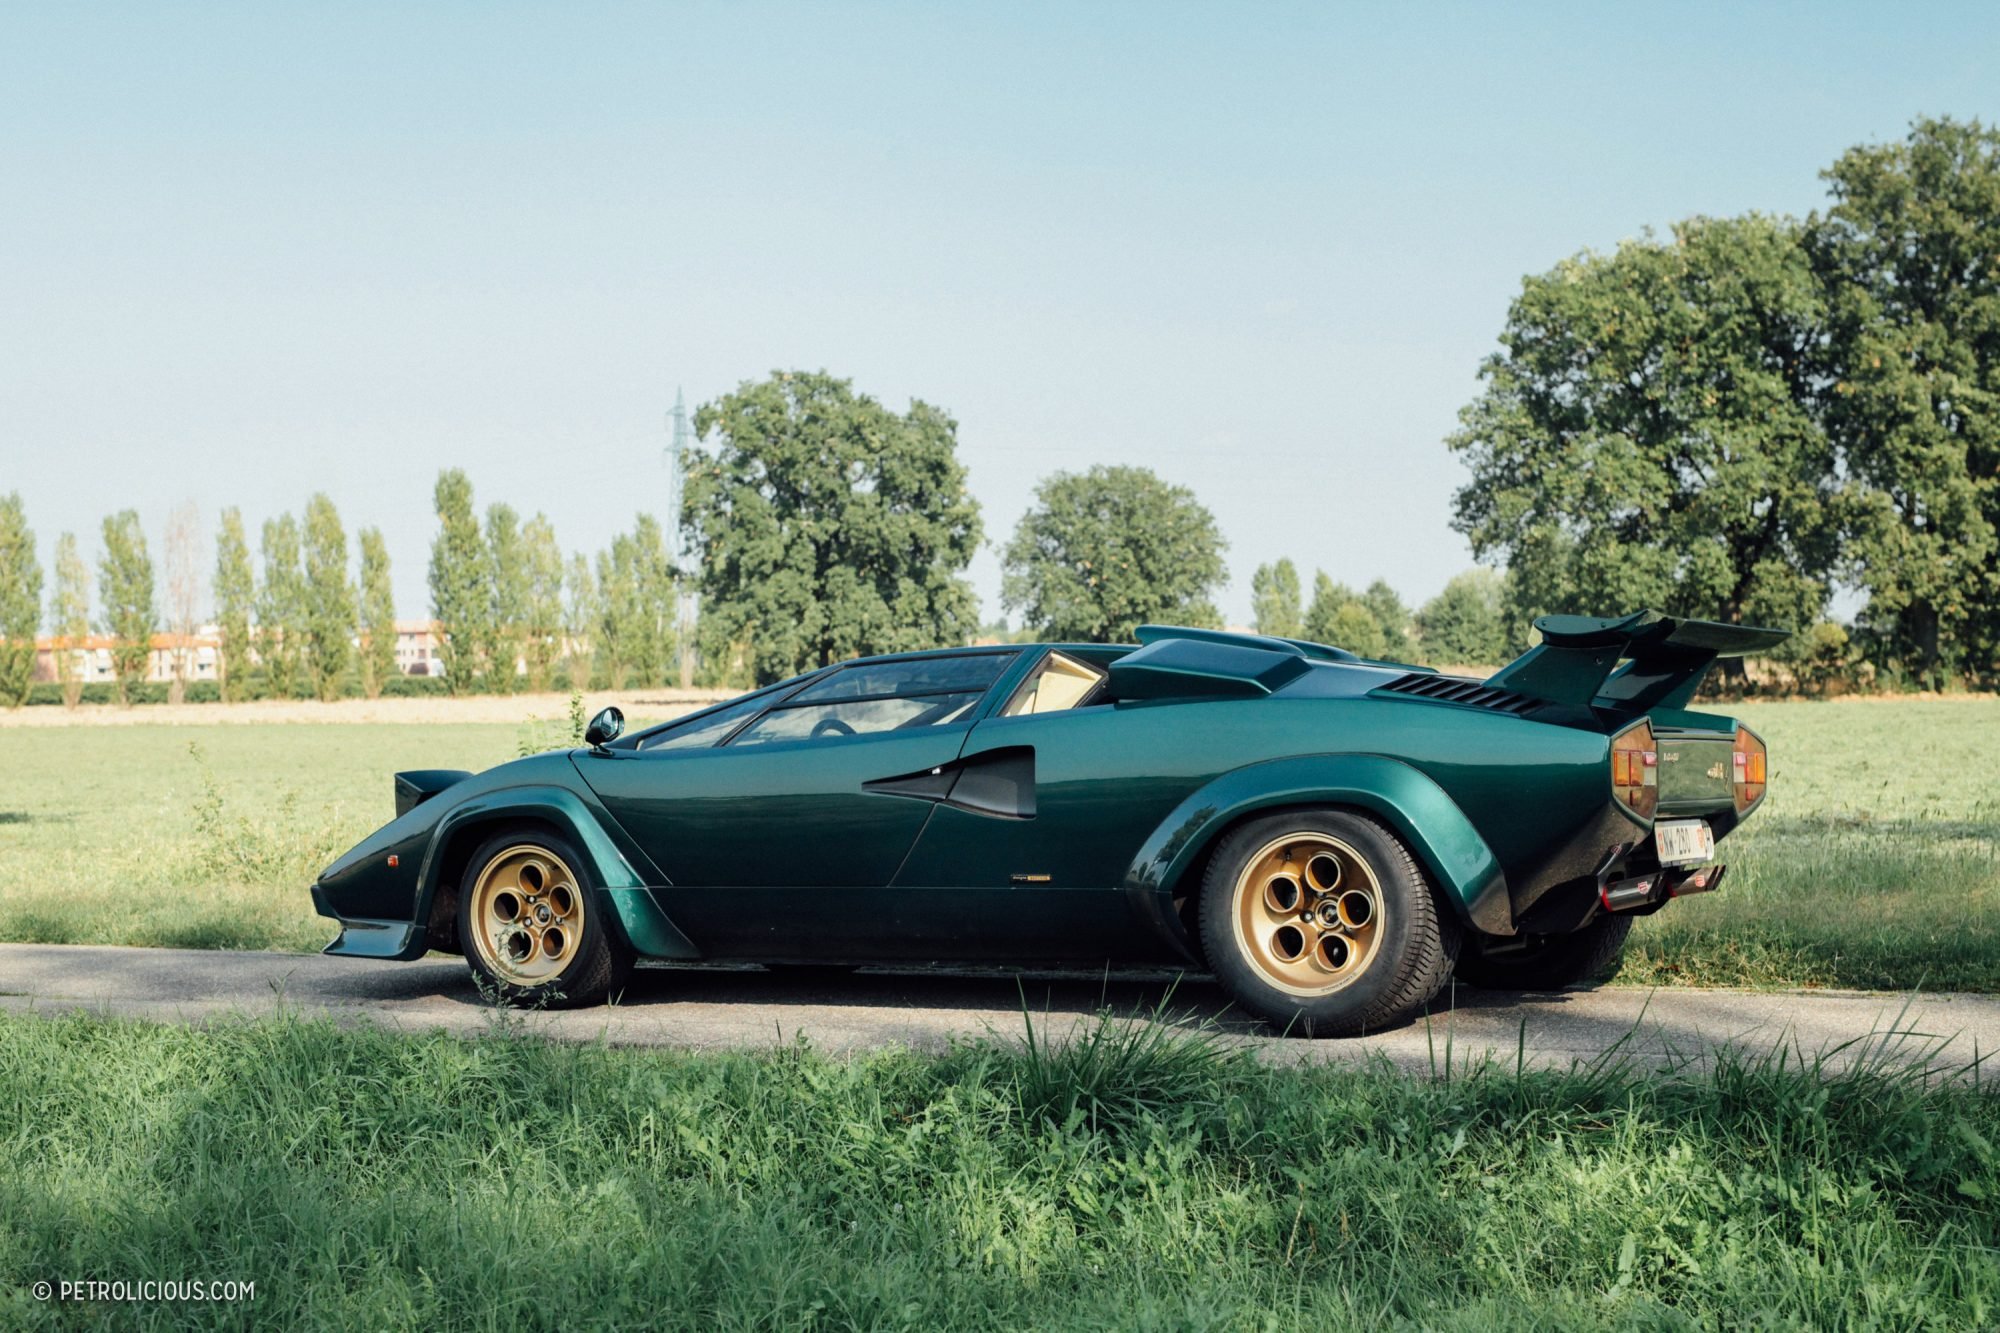 to this Lamborghini Countach in just a few years.